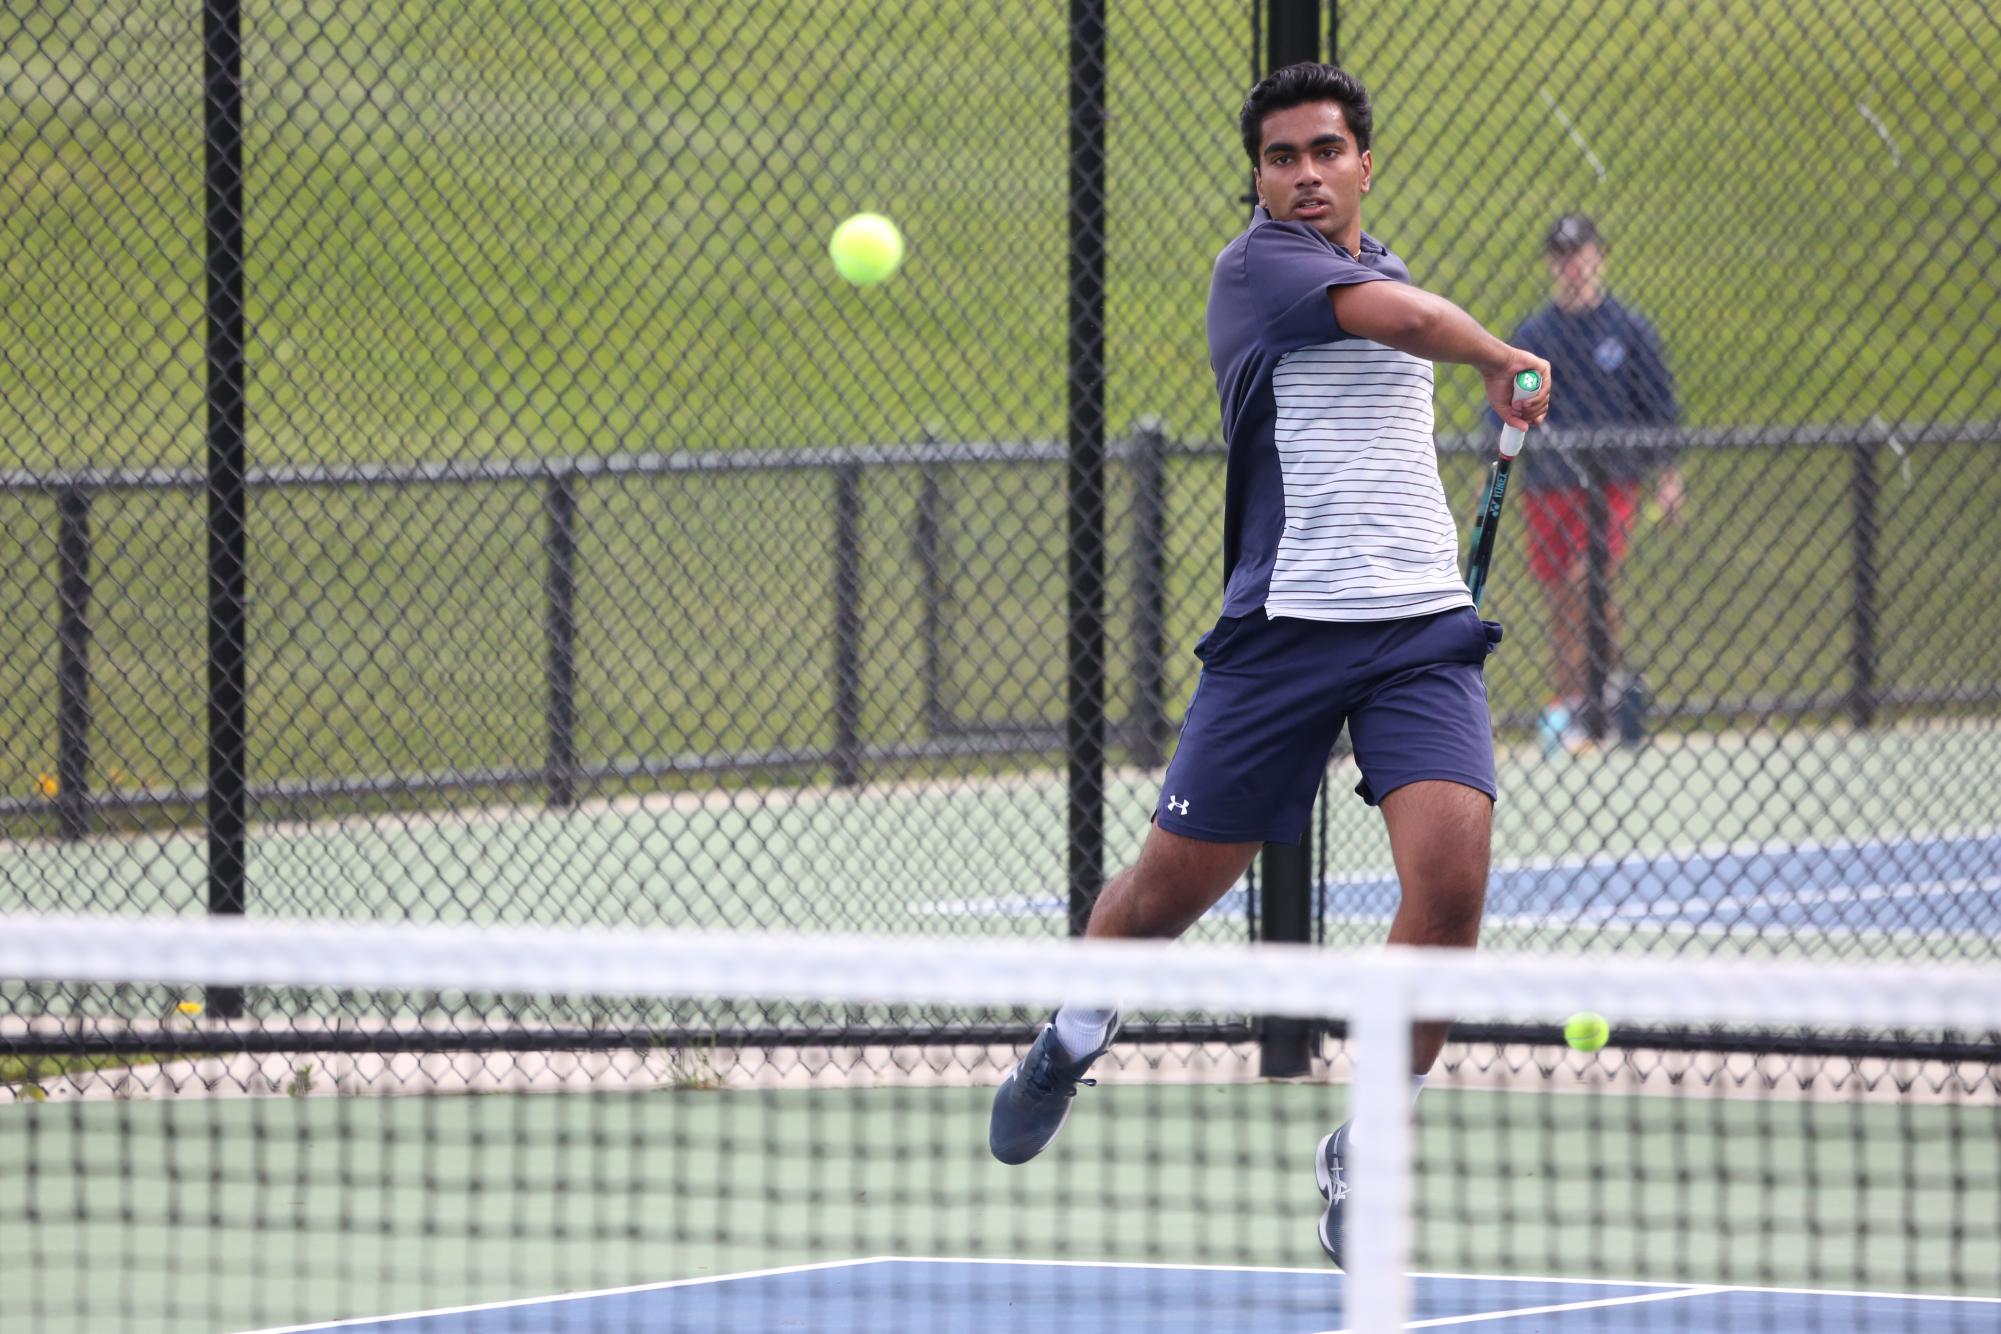 Competing number two for singles, Annamaneni led the team to an 8-3 record.